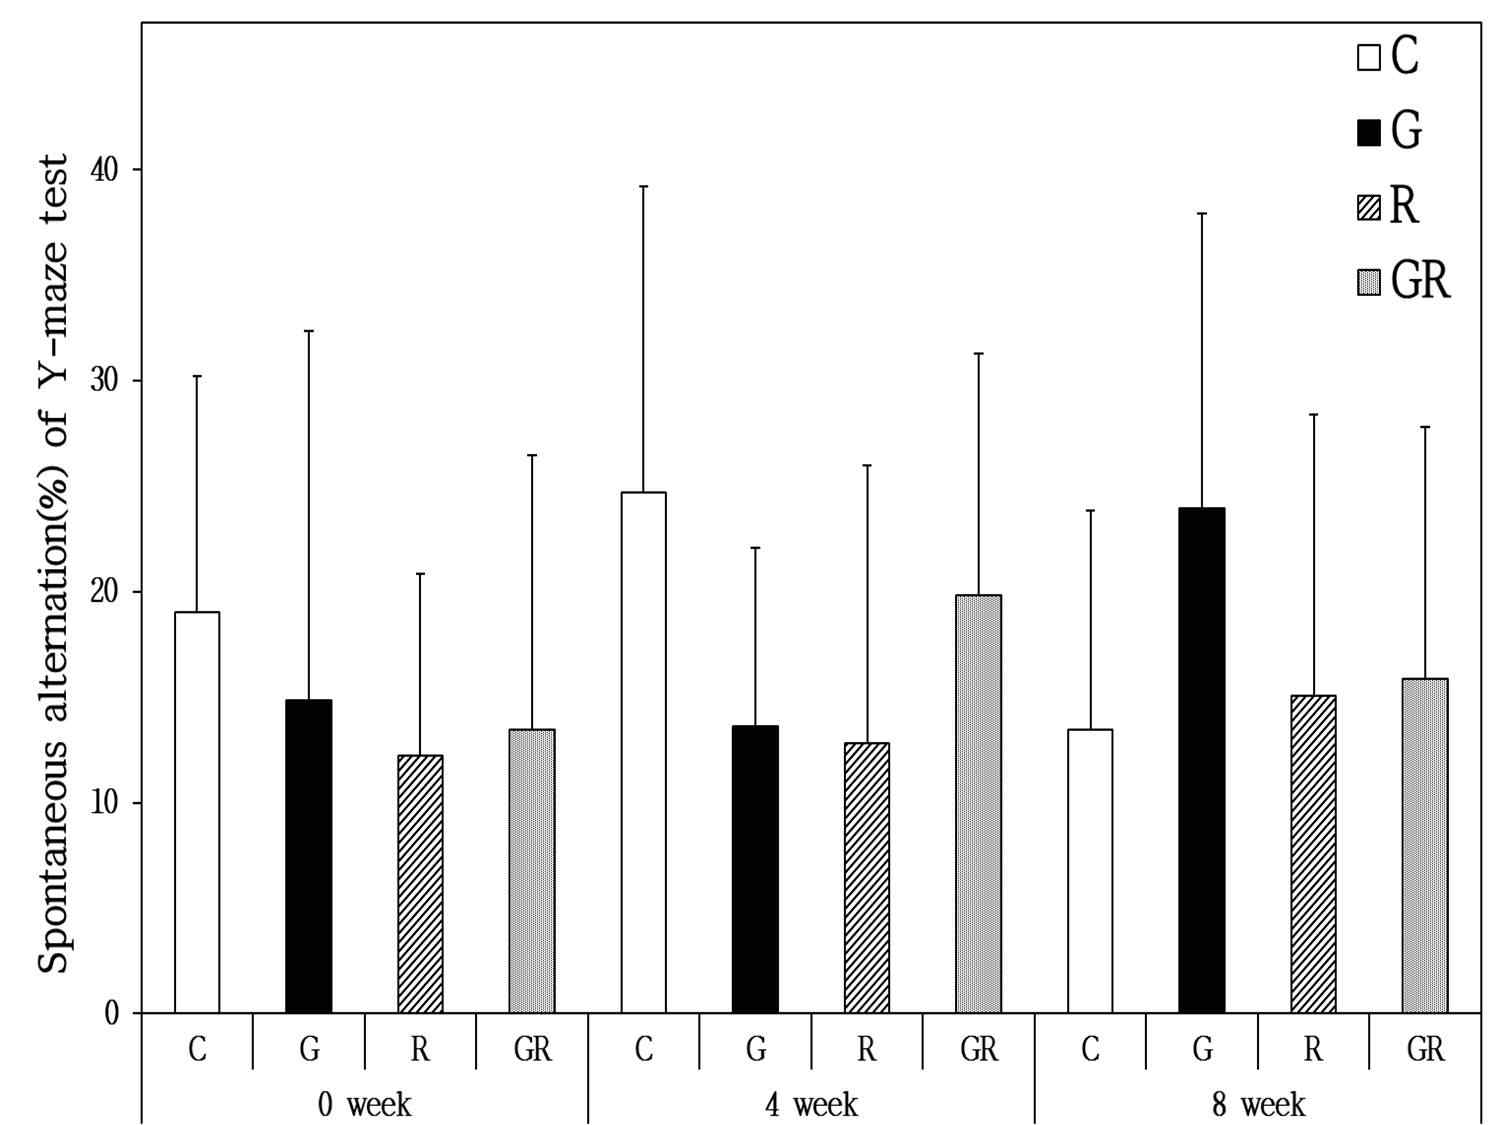 The effects of Ginseng Radix and Rehmanniae Radix extracts on B6C3-Tg mice in the spontaneous alternation(%) for Y-maze test. C, Control Group; G, Ginseng Group; R, Rehmanniae Group; GR, Ginseng & Rehmanniae Group. * : Mean significantly different between all the experimental groups at p<0.05 by Wilcoxon's signed-ranks test